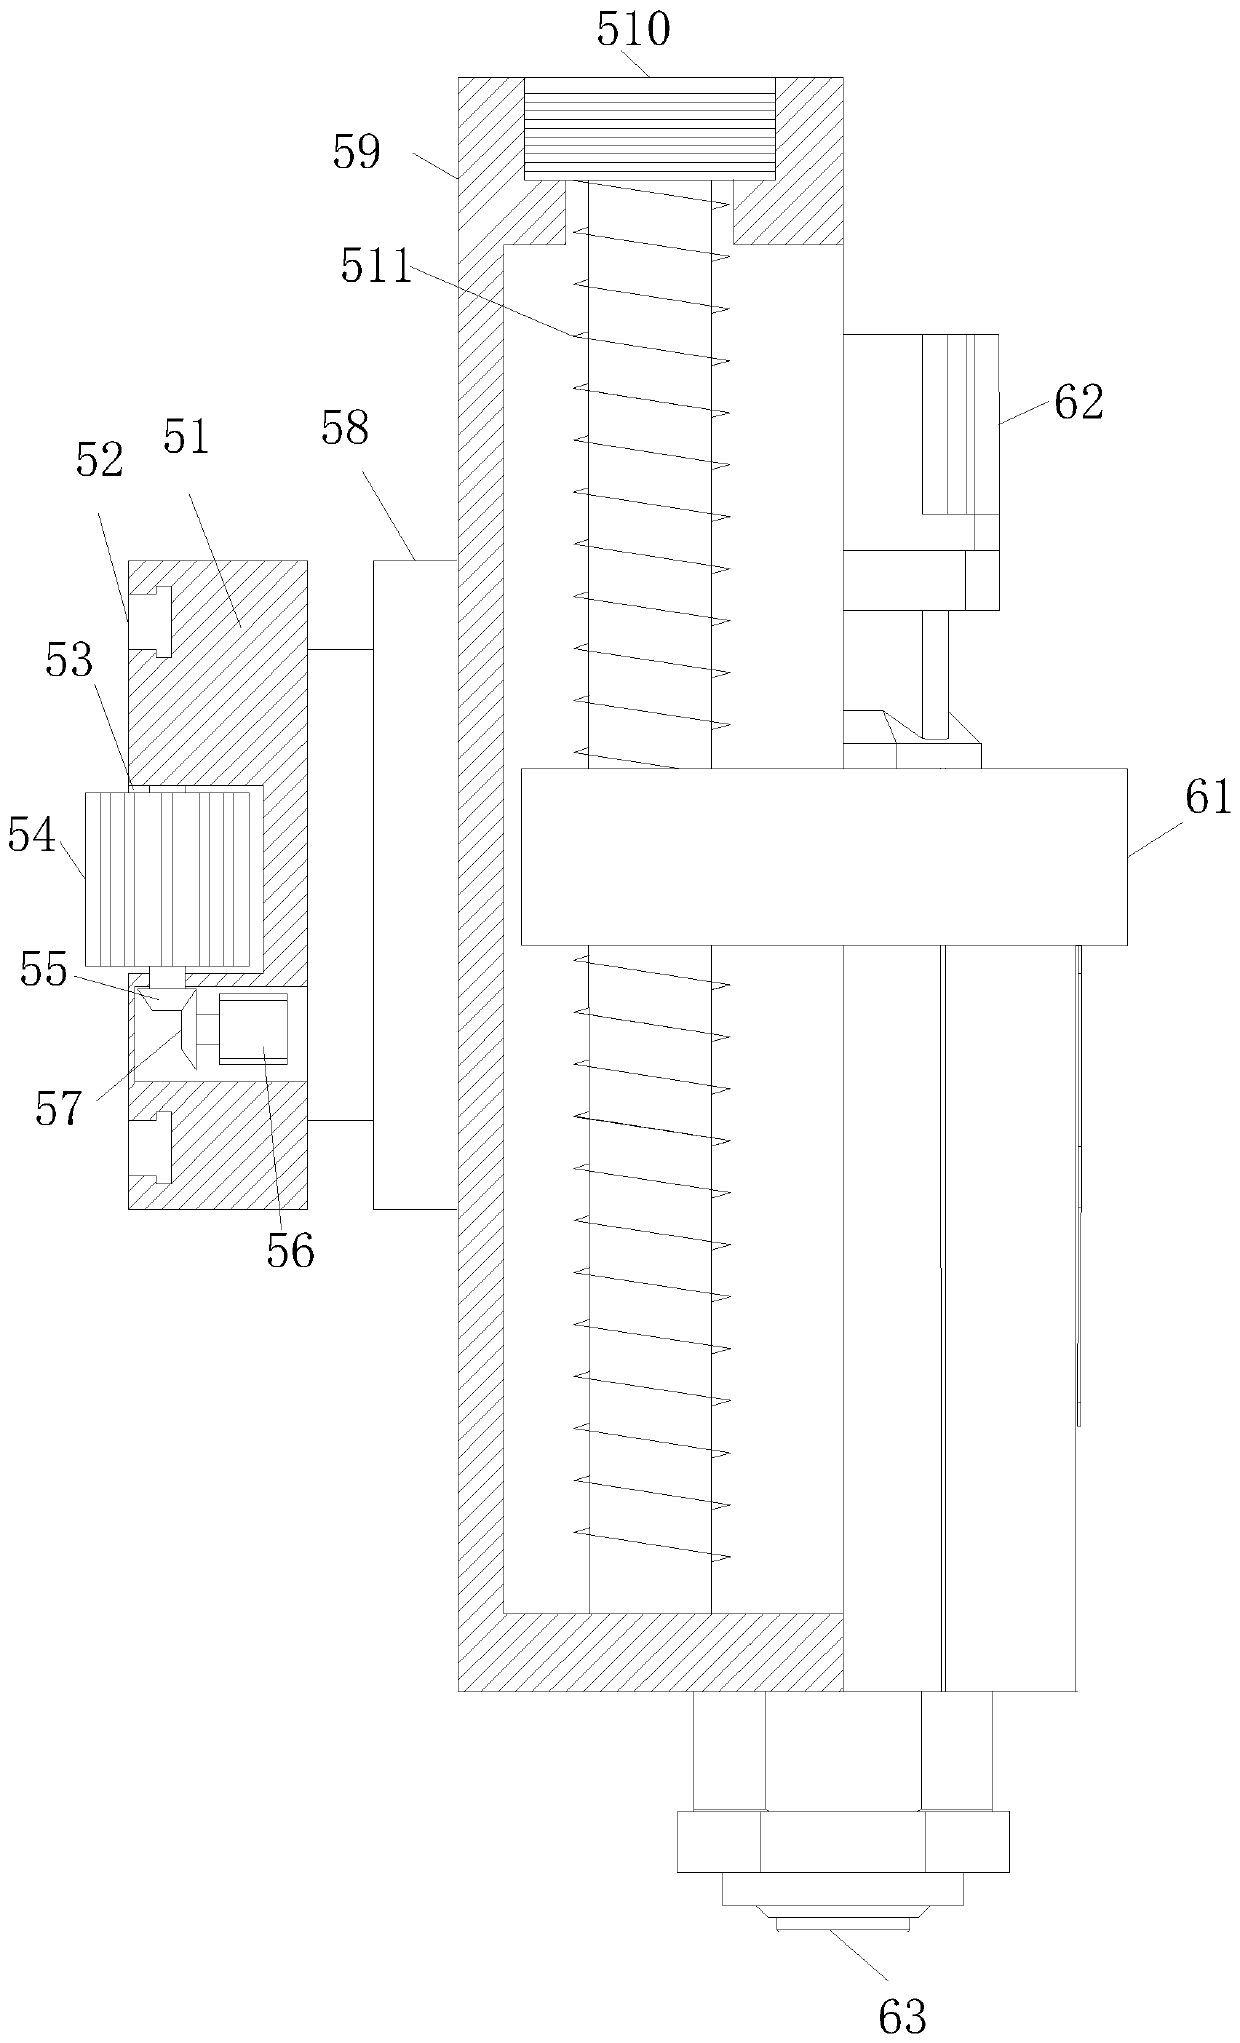 Double-shaft composite numerical control machine tool